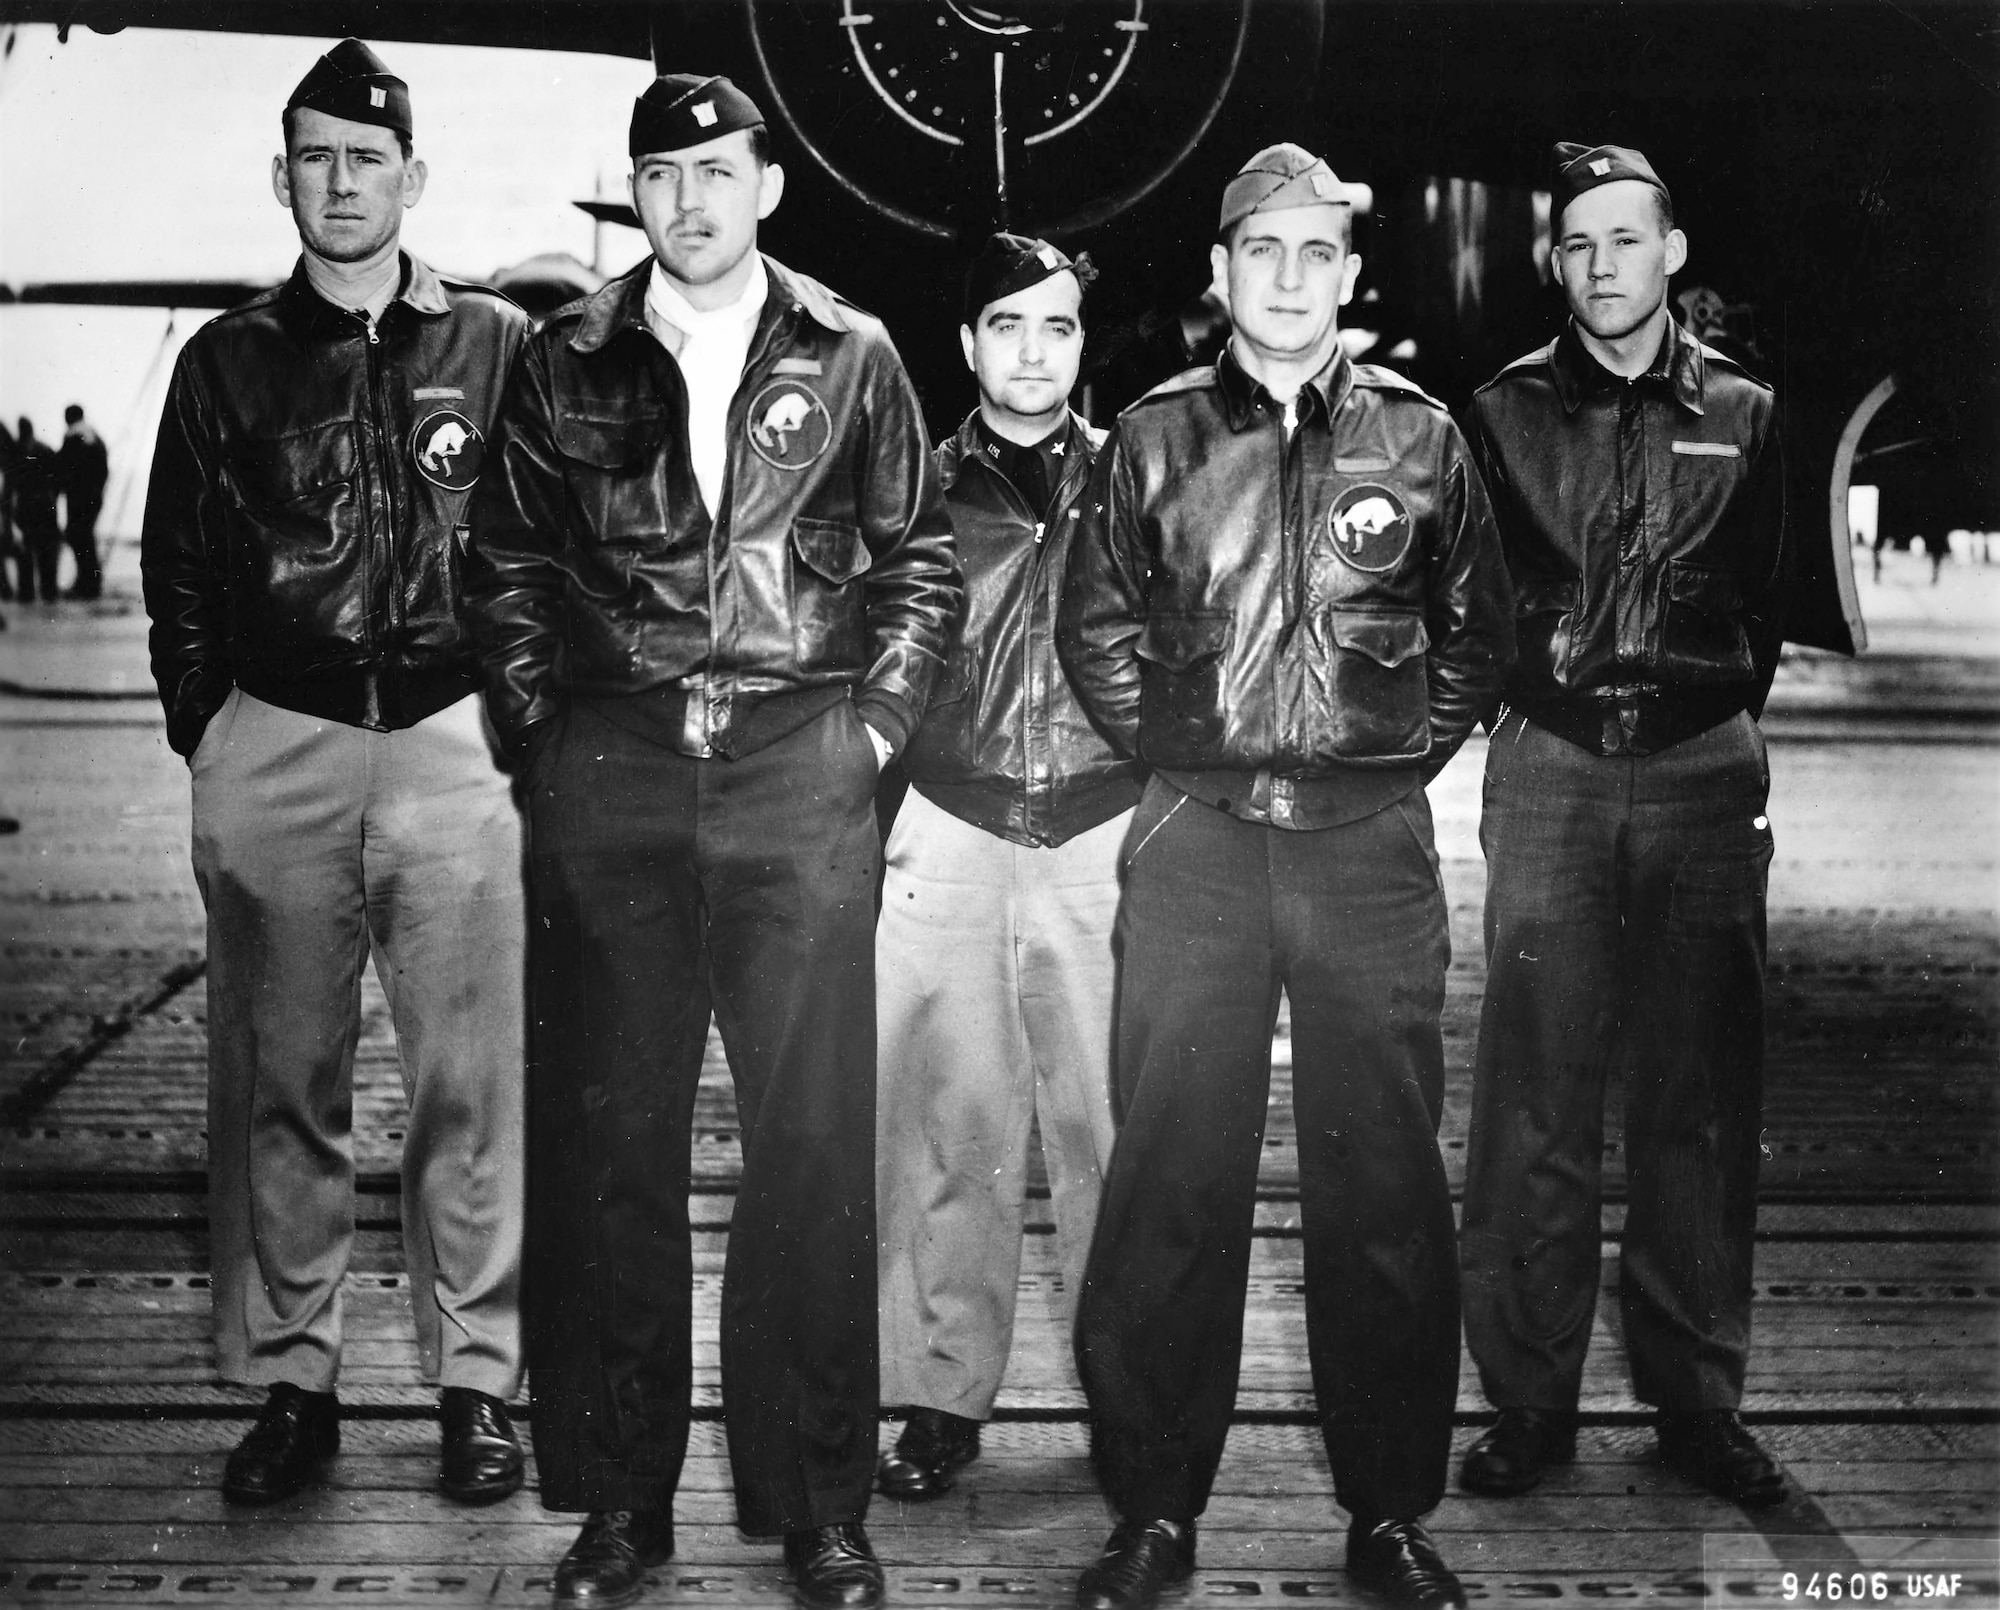 U.S. Army Air Corps Staff Sgt. David Thatcher (fifth from left) with the crew  of the Ruptured Duck, one of 16 B-25 Mitchell bombers that launched off the deck of the aircraft carrier the U.S.S. Hornet and headed to the coast of  Japan to wreak havoc on the Japanese empire April 18, 1942. After dropping its payload, the Ruptured Duck crashed into the China Sea. Thatcher helped save his other four crew members who were seriously hurt and protected them on a beach. (Photo provided courtesy of the Doolittle Tokyo Raiders official website/Released).